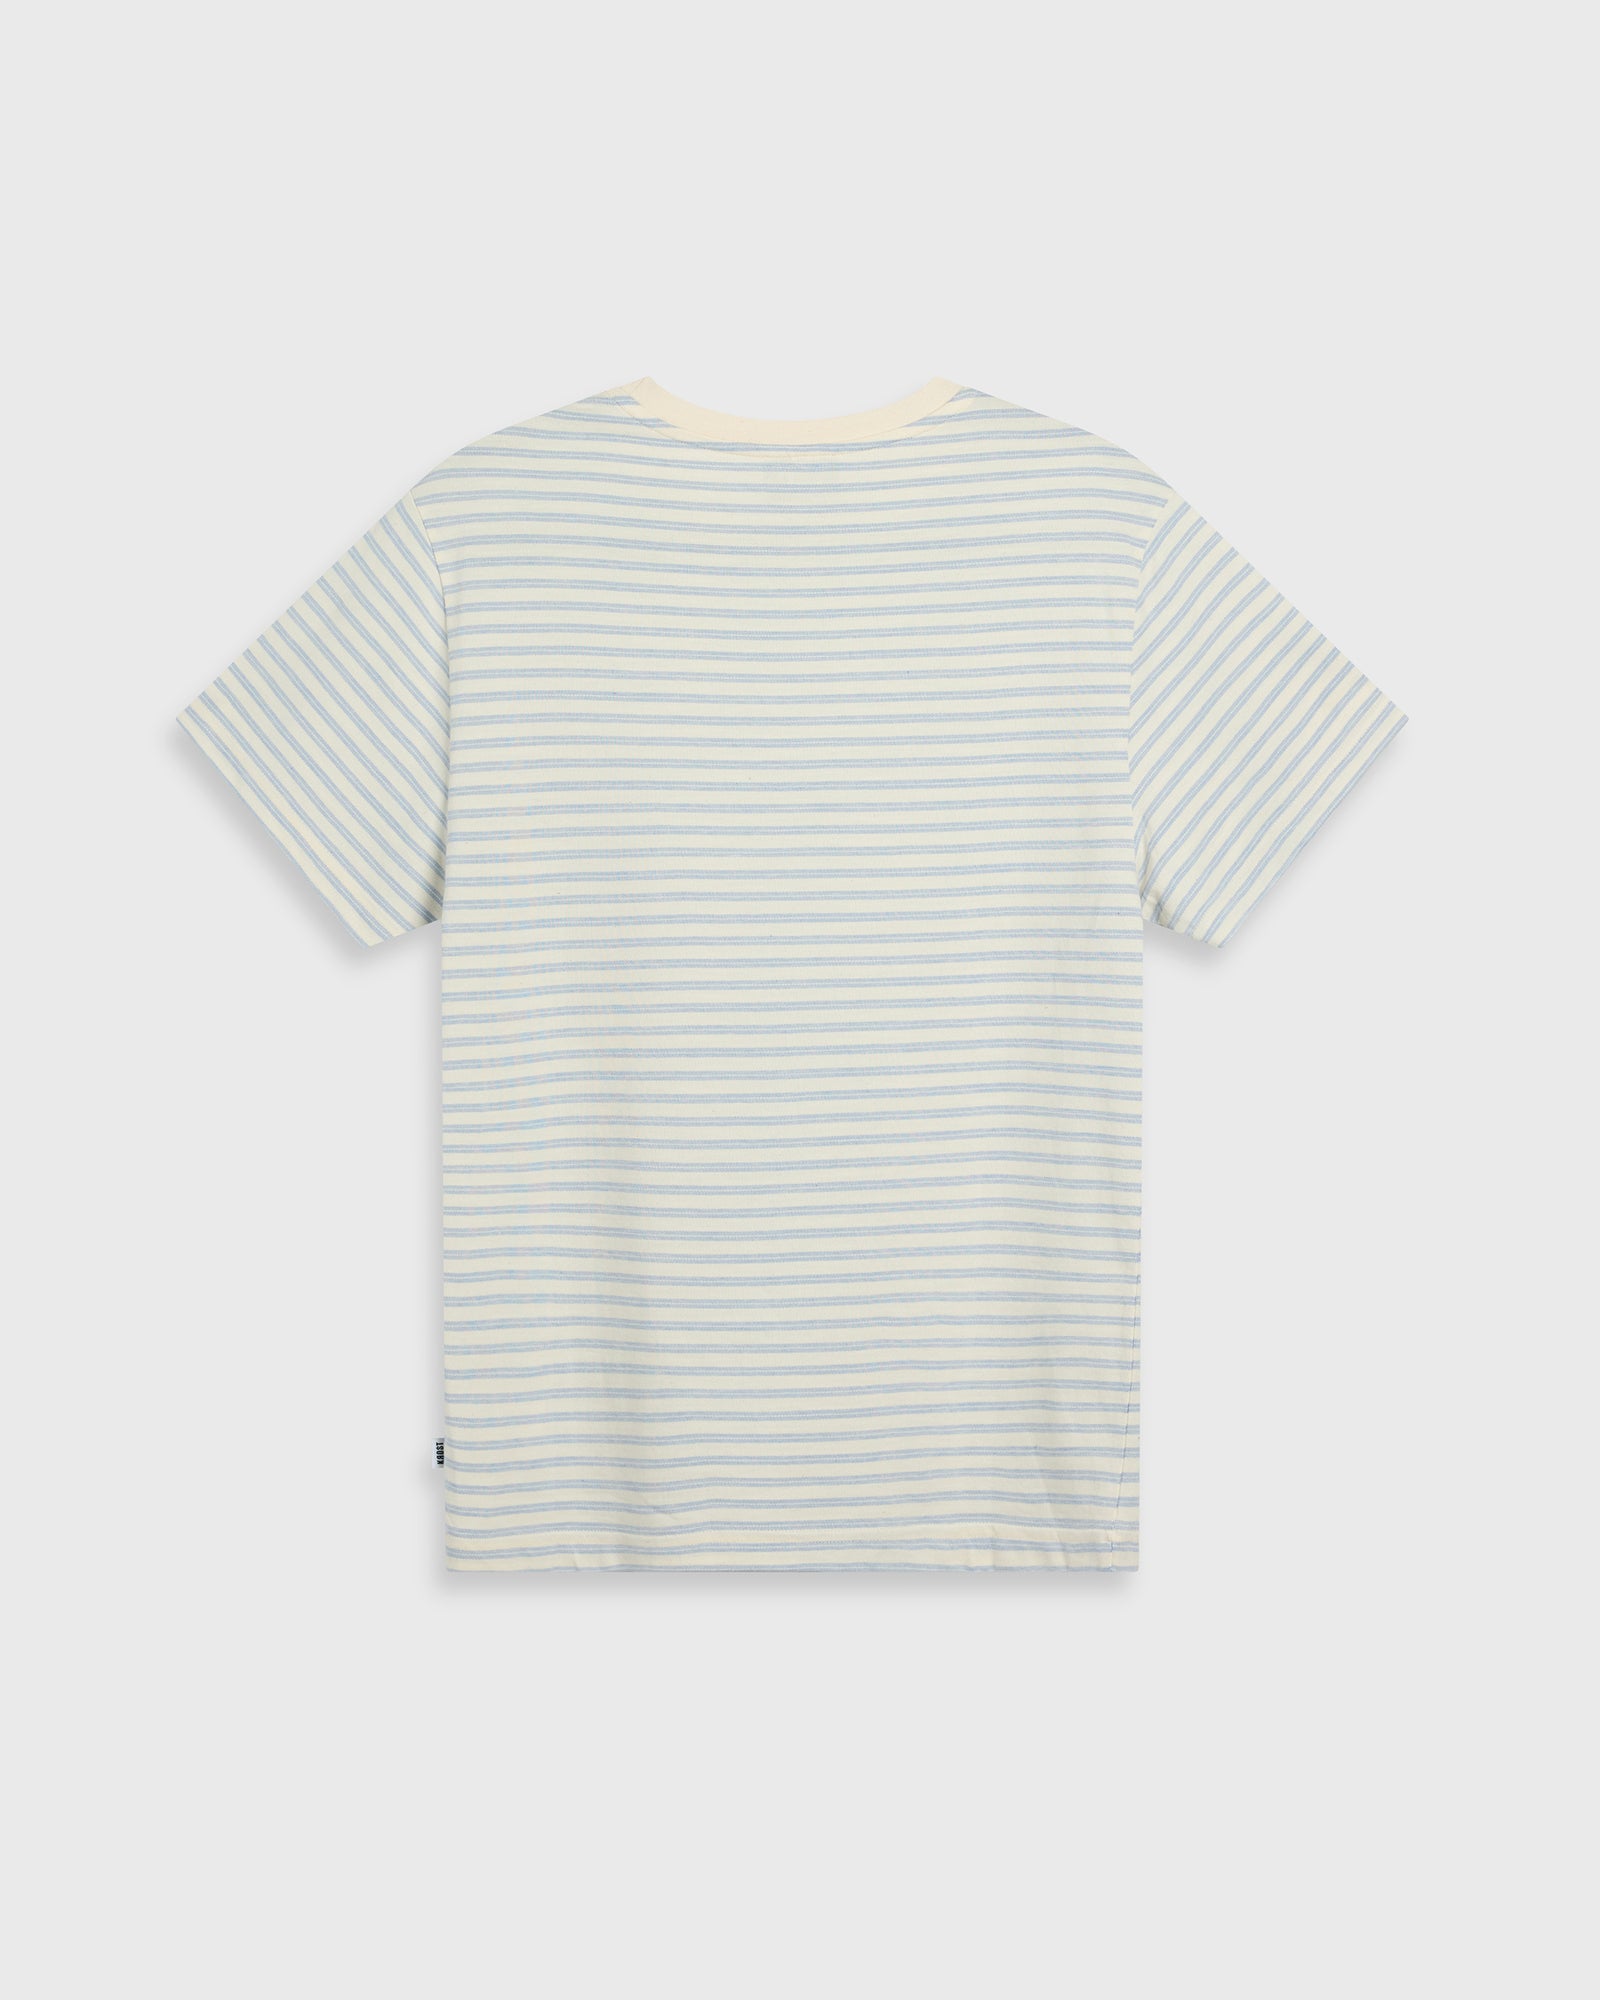 Blue and off white striped short sleeve tee - designer fashion stripe tees by Krost for men & women